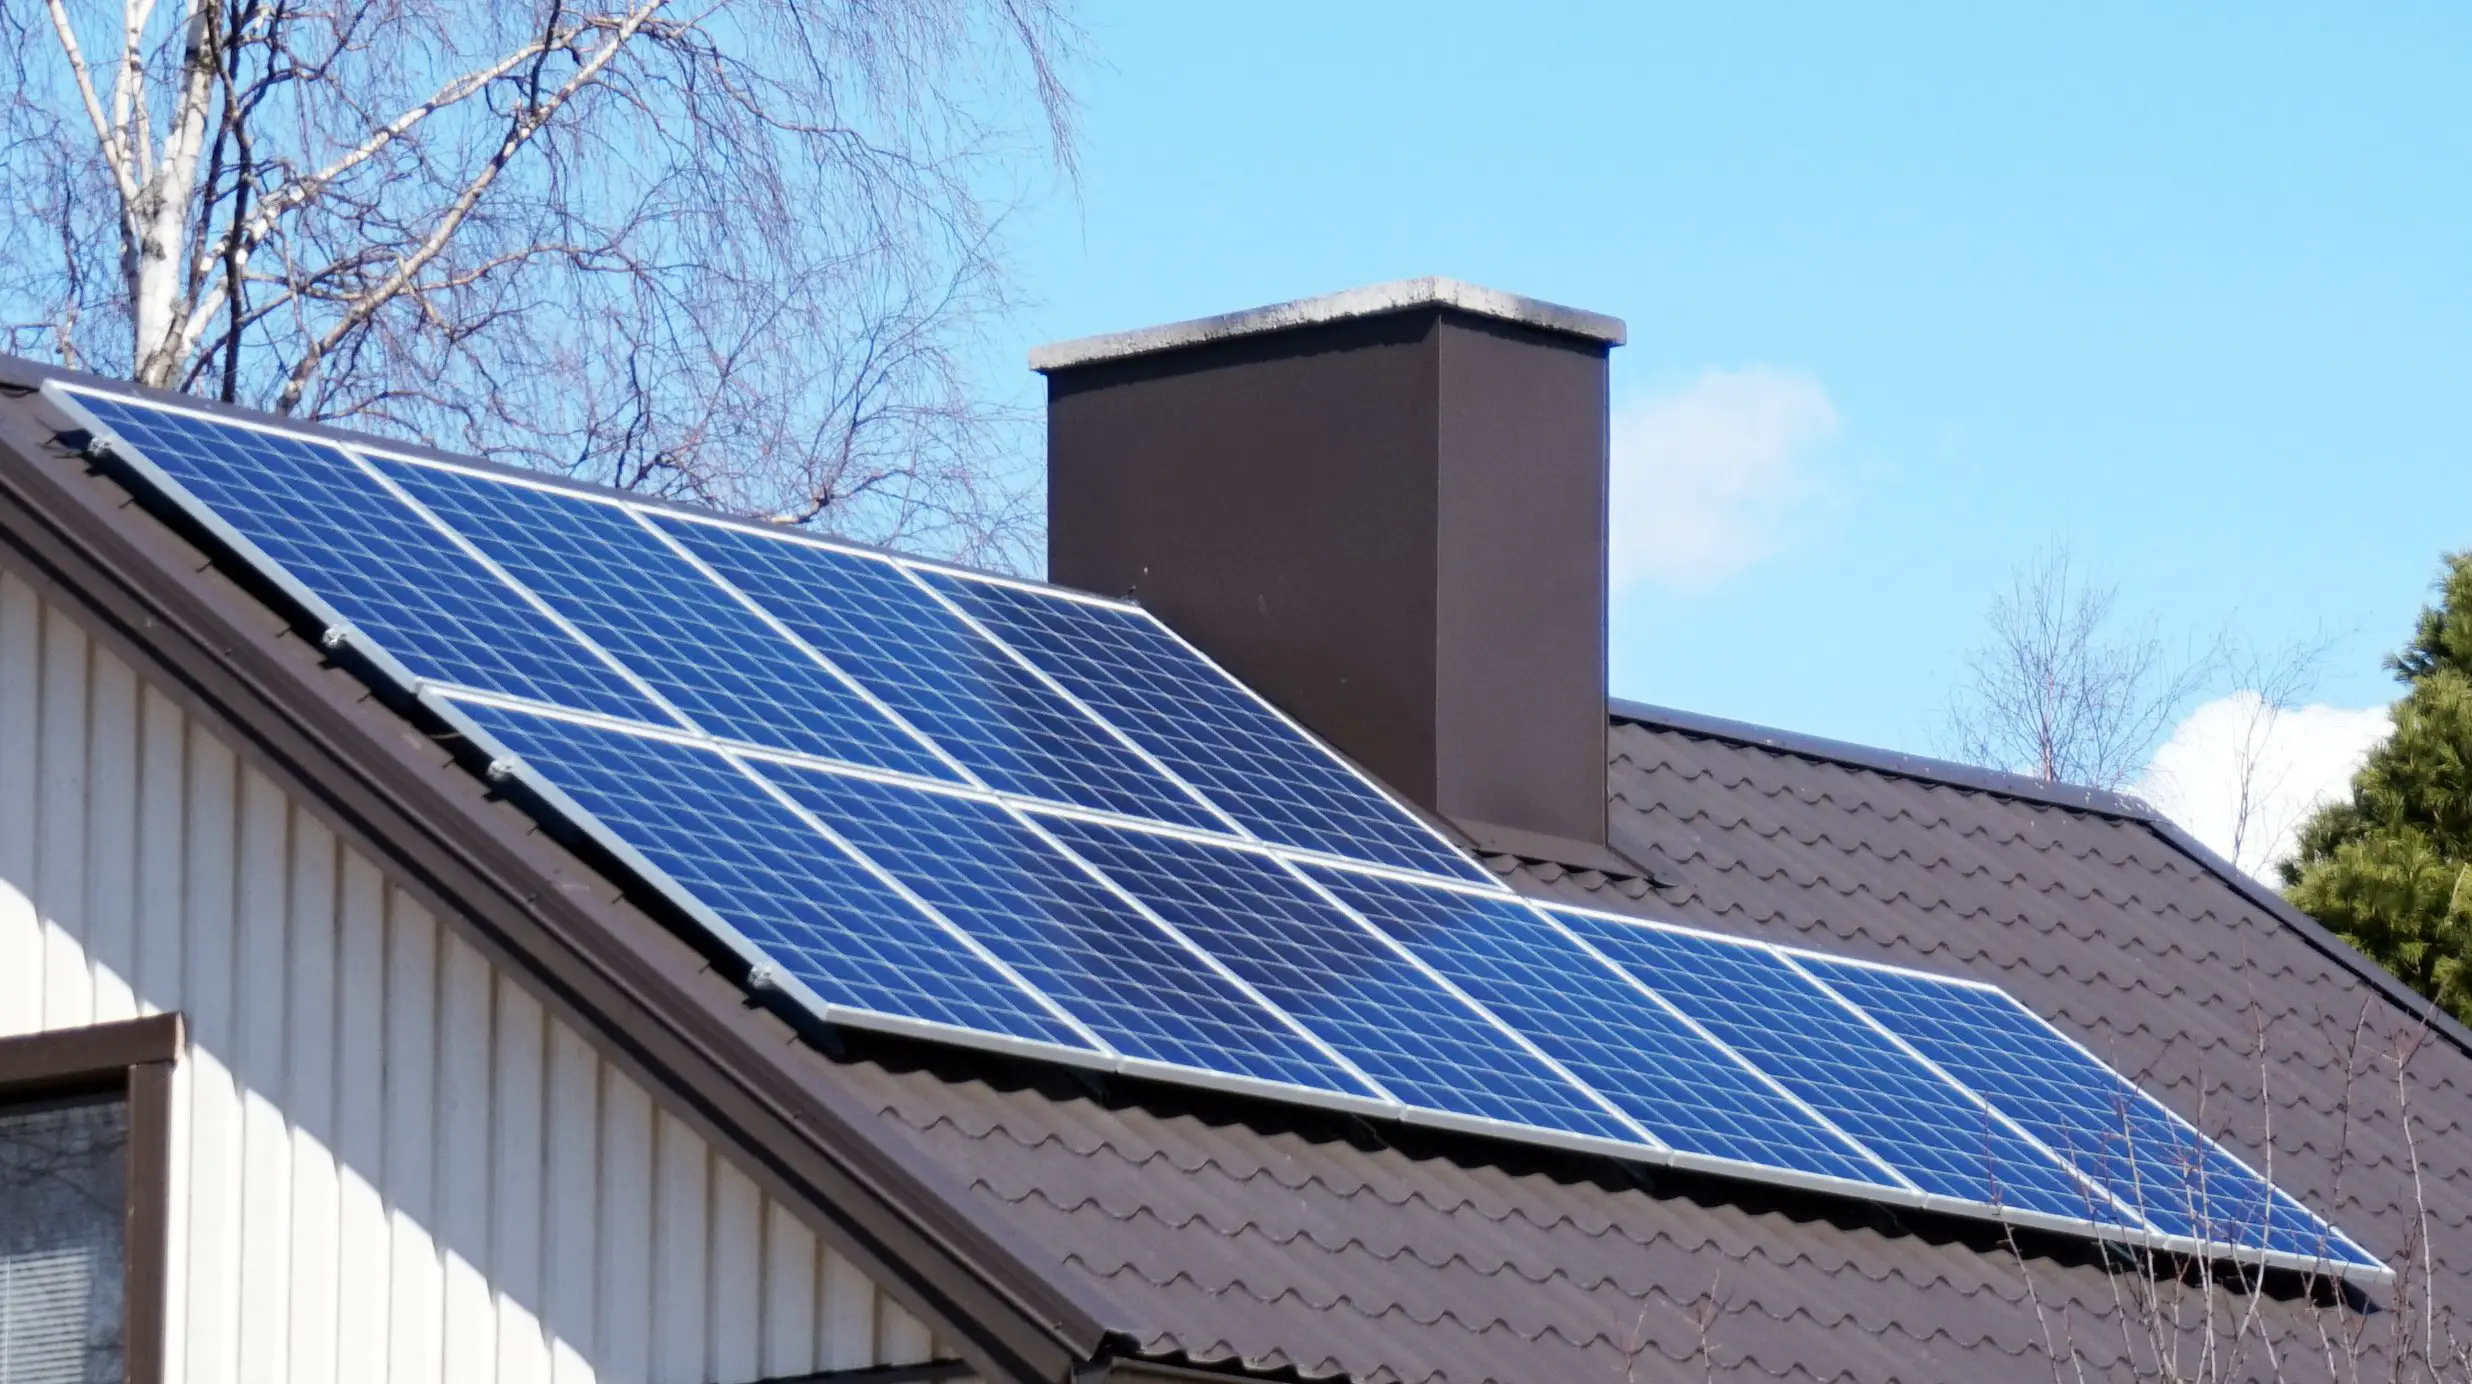 How to Choose the Best Solar Panel for Your Home?